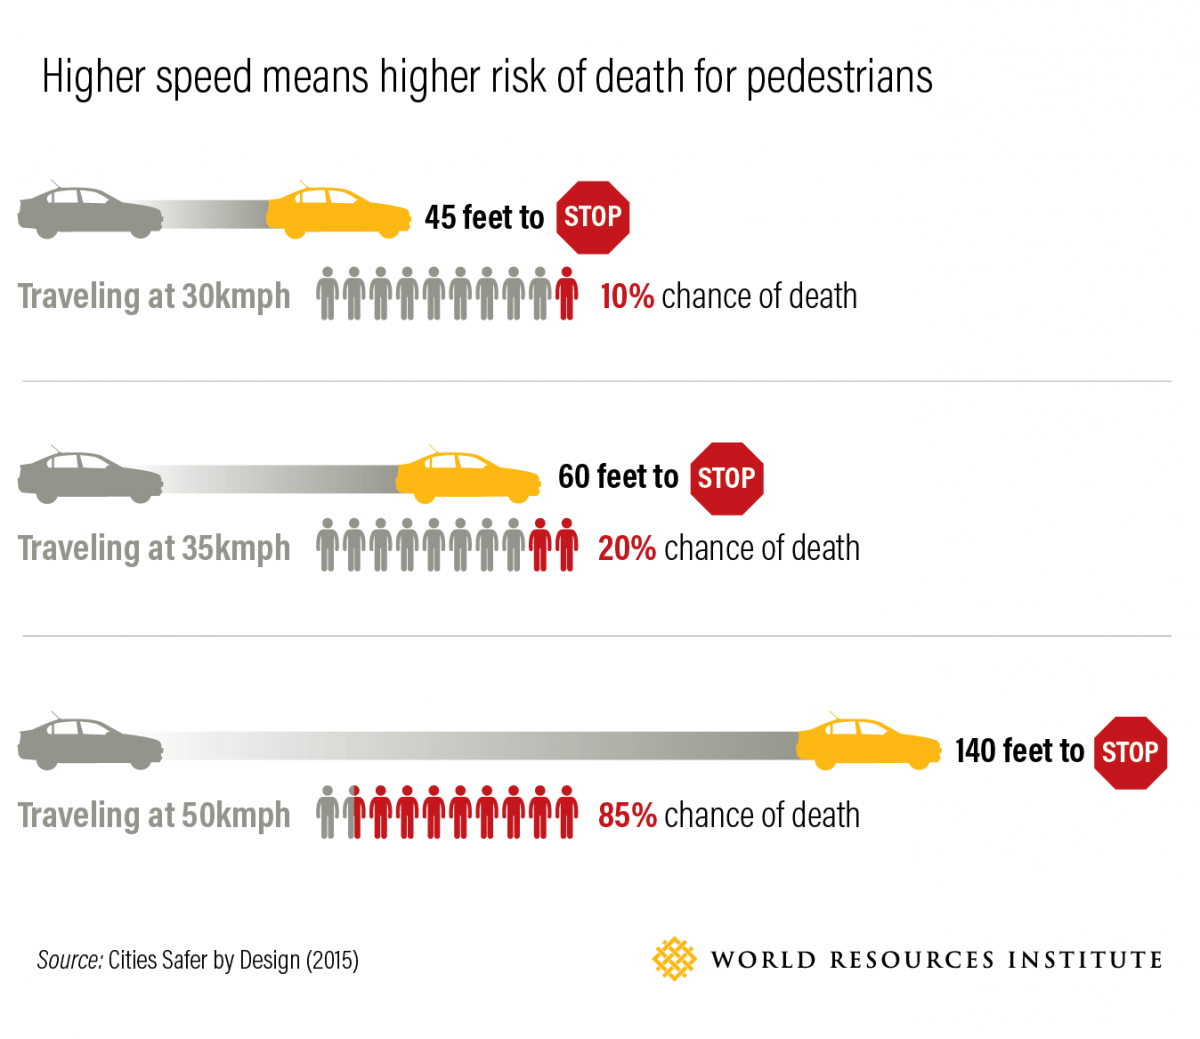 Speeding initiates deadly crashes – the faster a vehicle travels, the greater is the likelihood of impact and the higher the severity of the consequences of the crash. Source: WRI